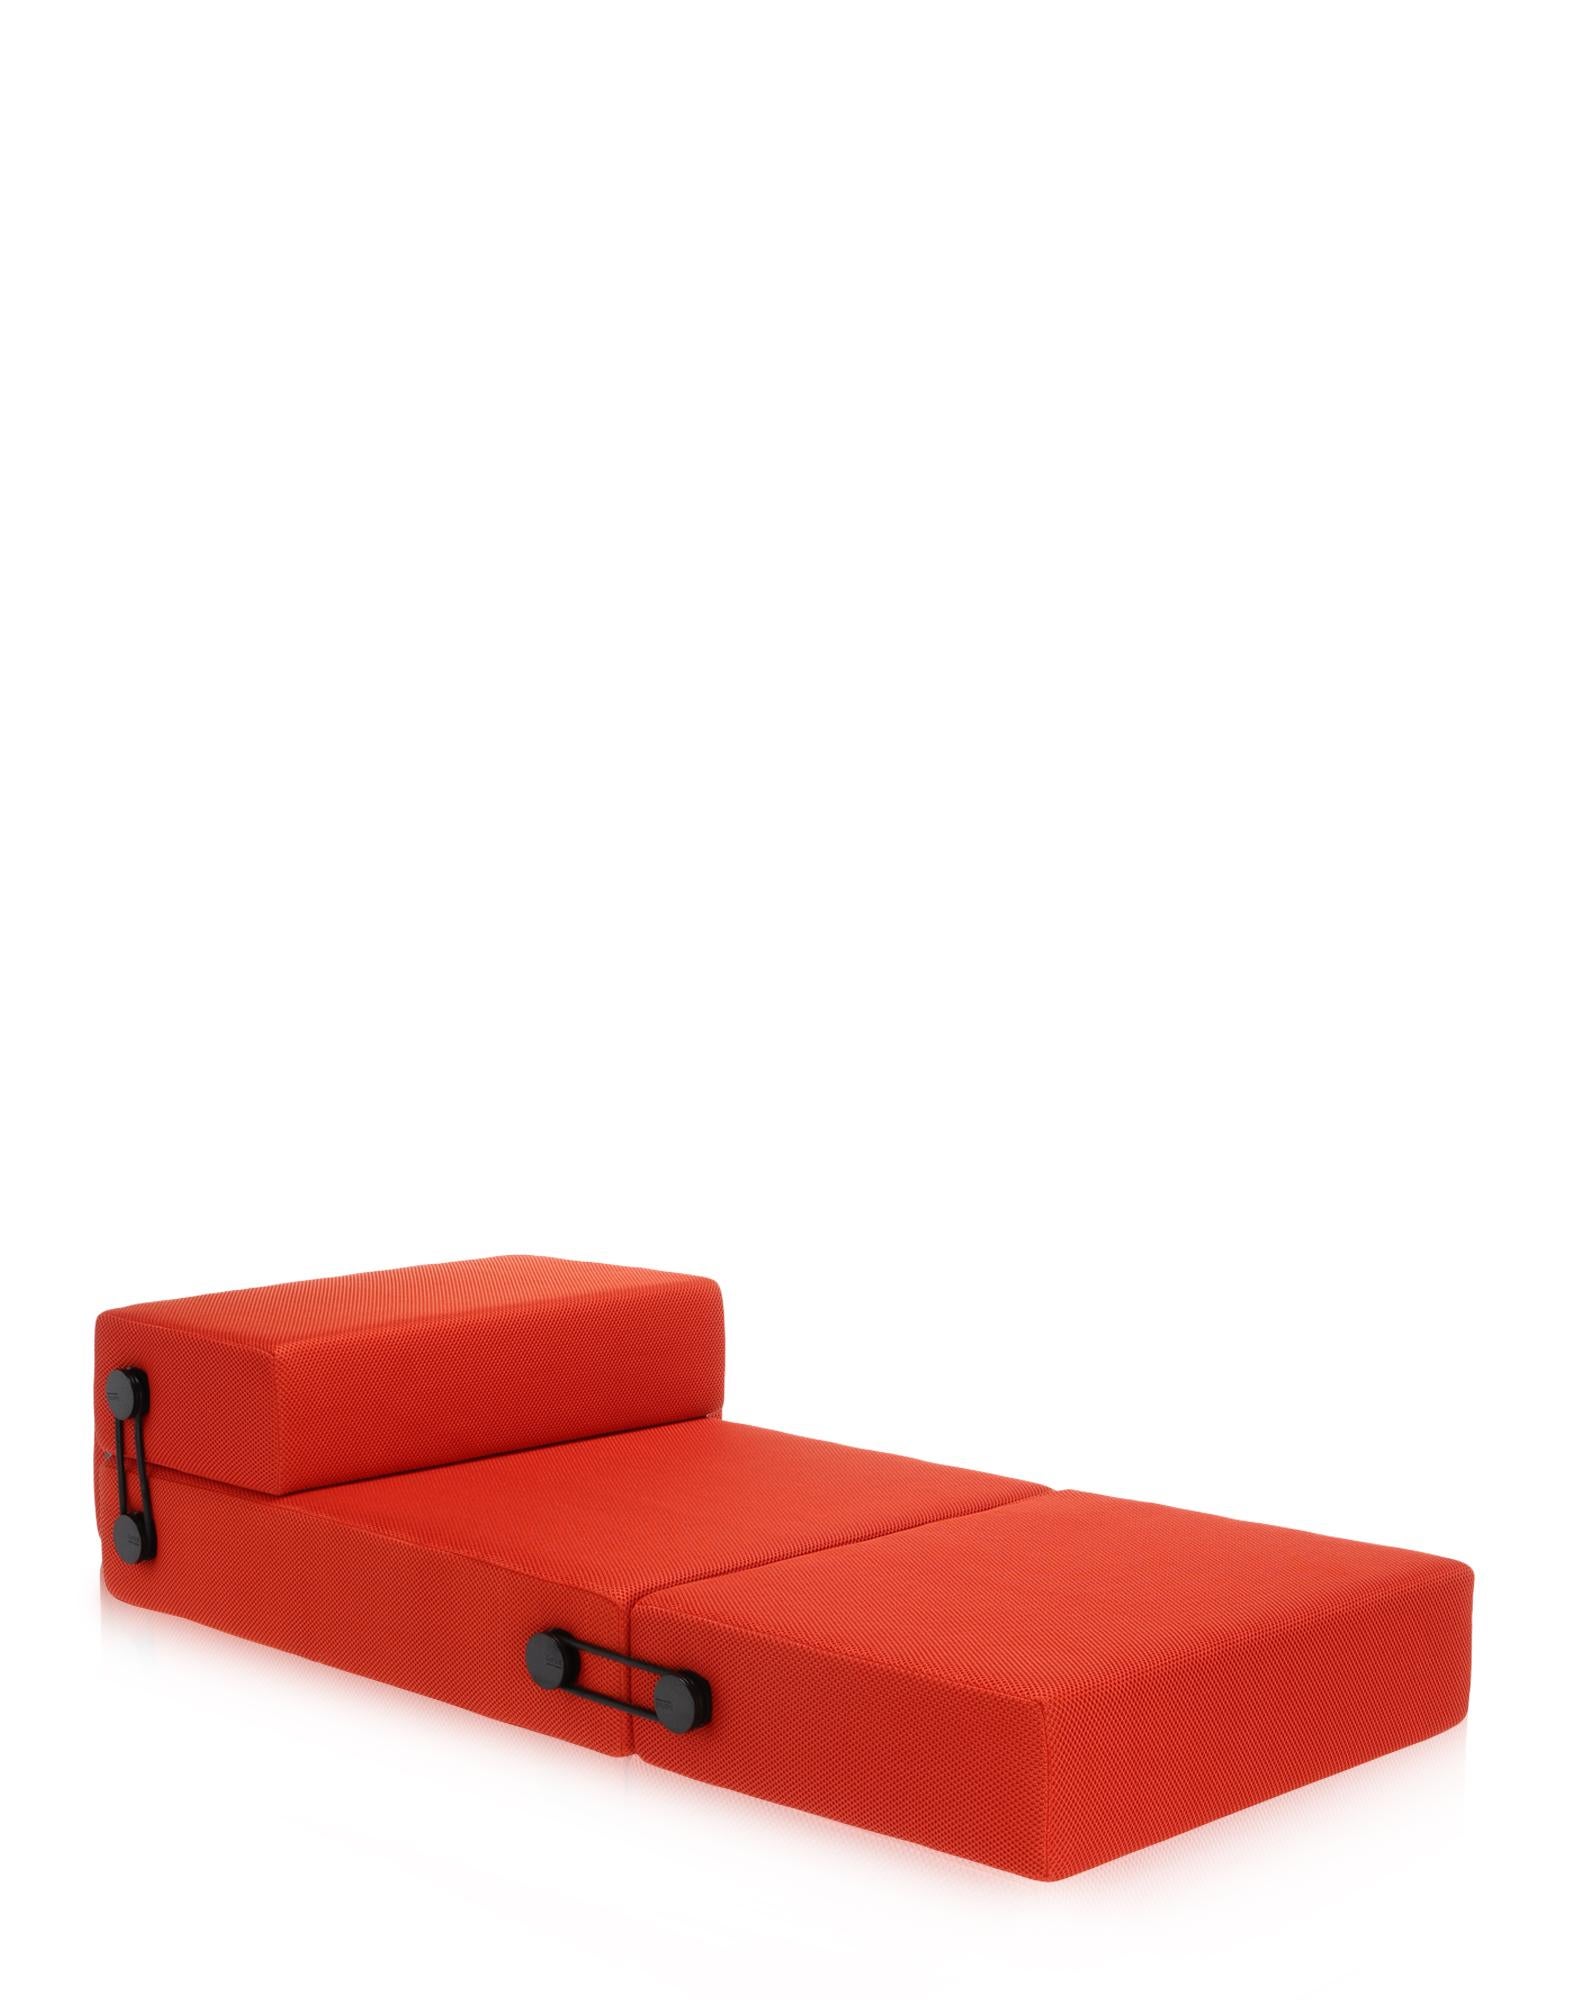 Trix is made up of three different elements connected by an elegant system of elastics which can transform and adapt to different uses through easy rotation. Trix can be an original two-person pouf, a comfortable bed, chaise lounge and inviting